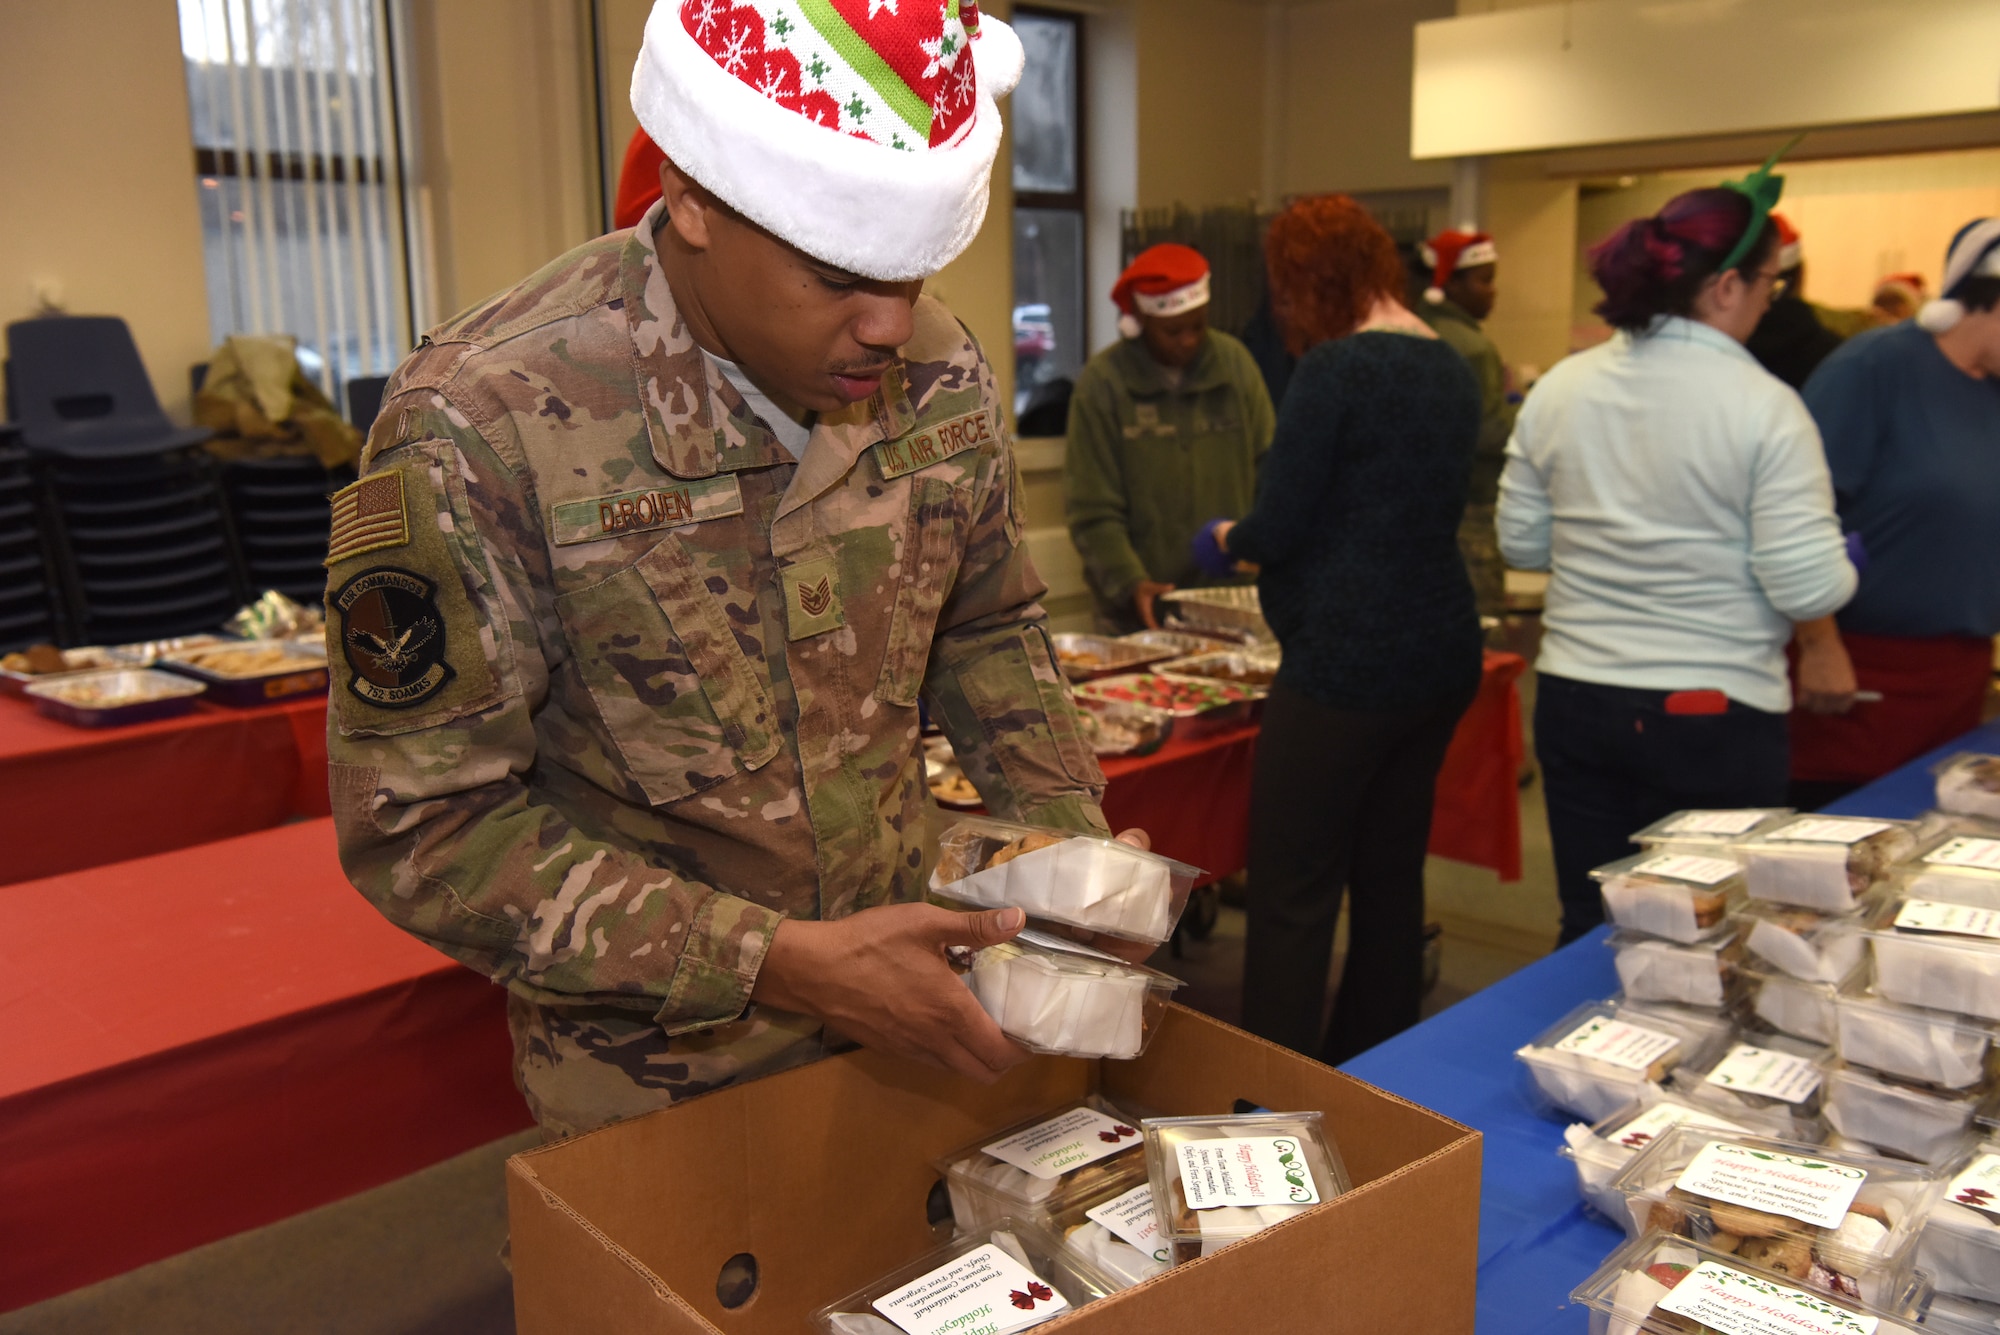 Technical Sgt. Skylar DeRouen, 752nd Special Operations Group munitions production section chief, packages holiday cookies prior to delivery during the annual Holiday Cookie Drive at RAF Mildenhall, England, Dec. 12, 2019. The cookie drive takes place during the first part of December to provide base dorm residents a comforting taste of home in the form of cookies. (U.S. Air Force photo by Senior Airman Brandon Esau)